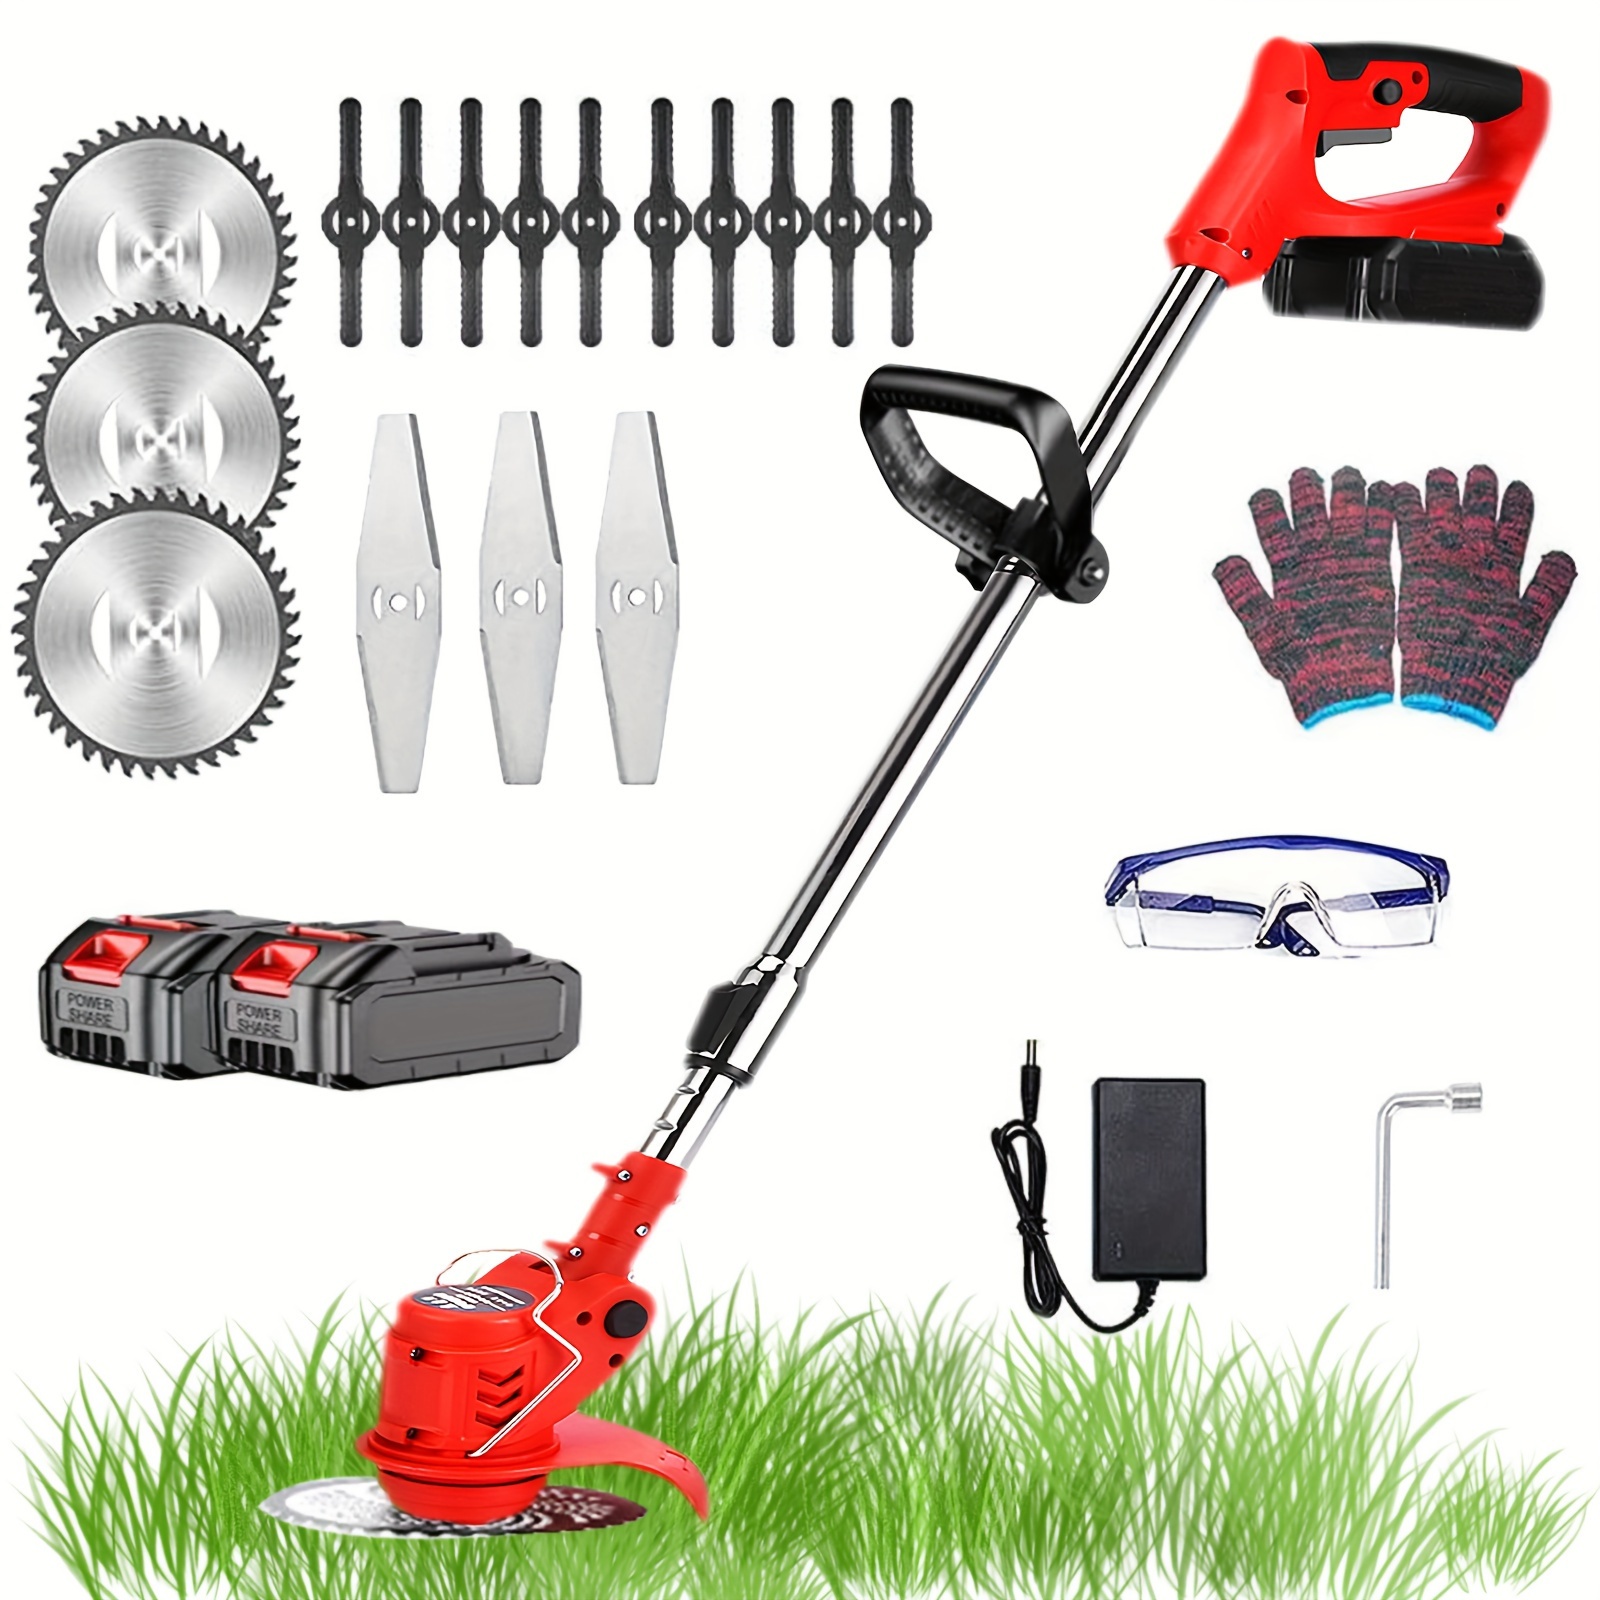 

Lawn Mower, Mower, Cordless Lawn Mower, 3-in-1 Multi-purpose Lawn Mower, Yard And Garden Lawn Care Lawn Mower, Shrubs Around The Yard (3 Colors Available)